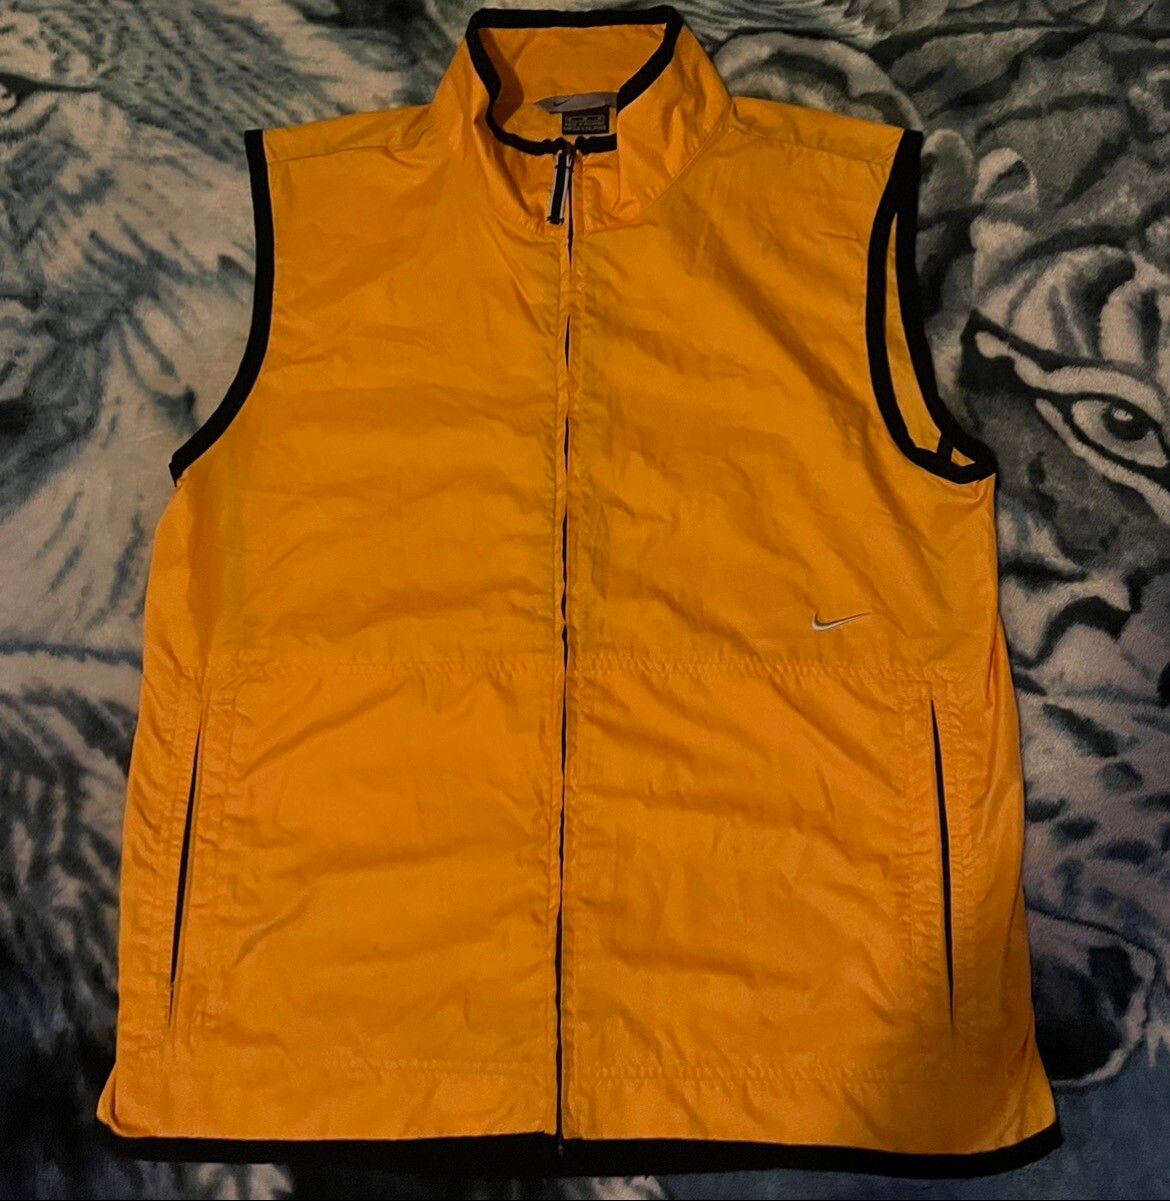 Nike Nike zip up vest Size US M / EU 48-50 / 2 - 1 Preview